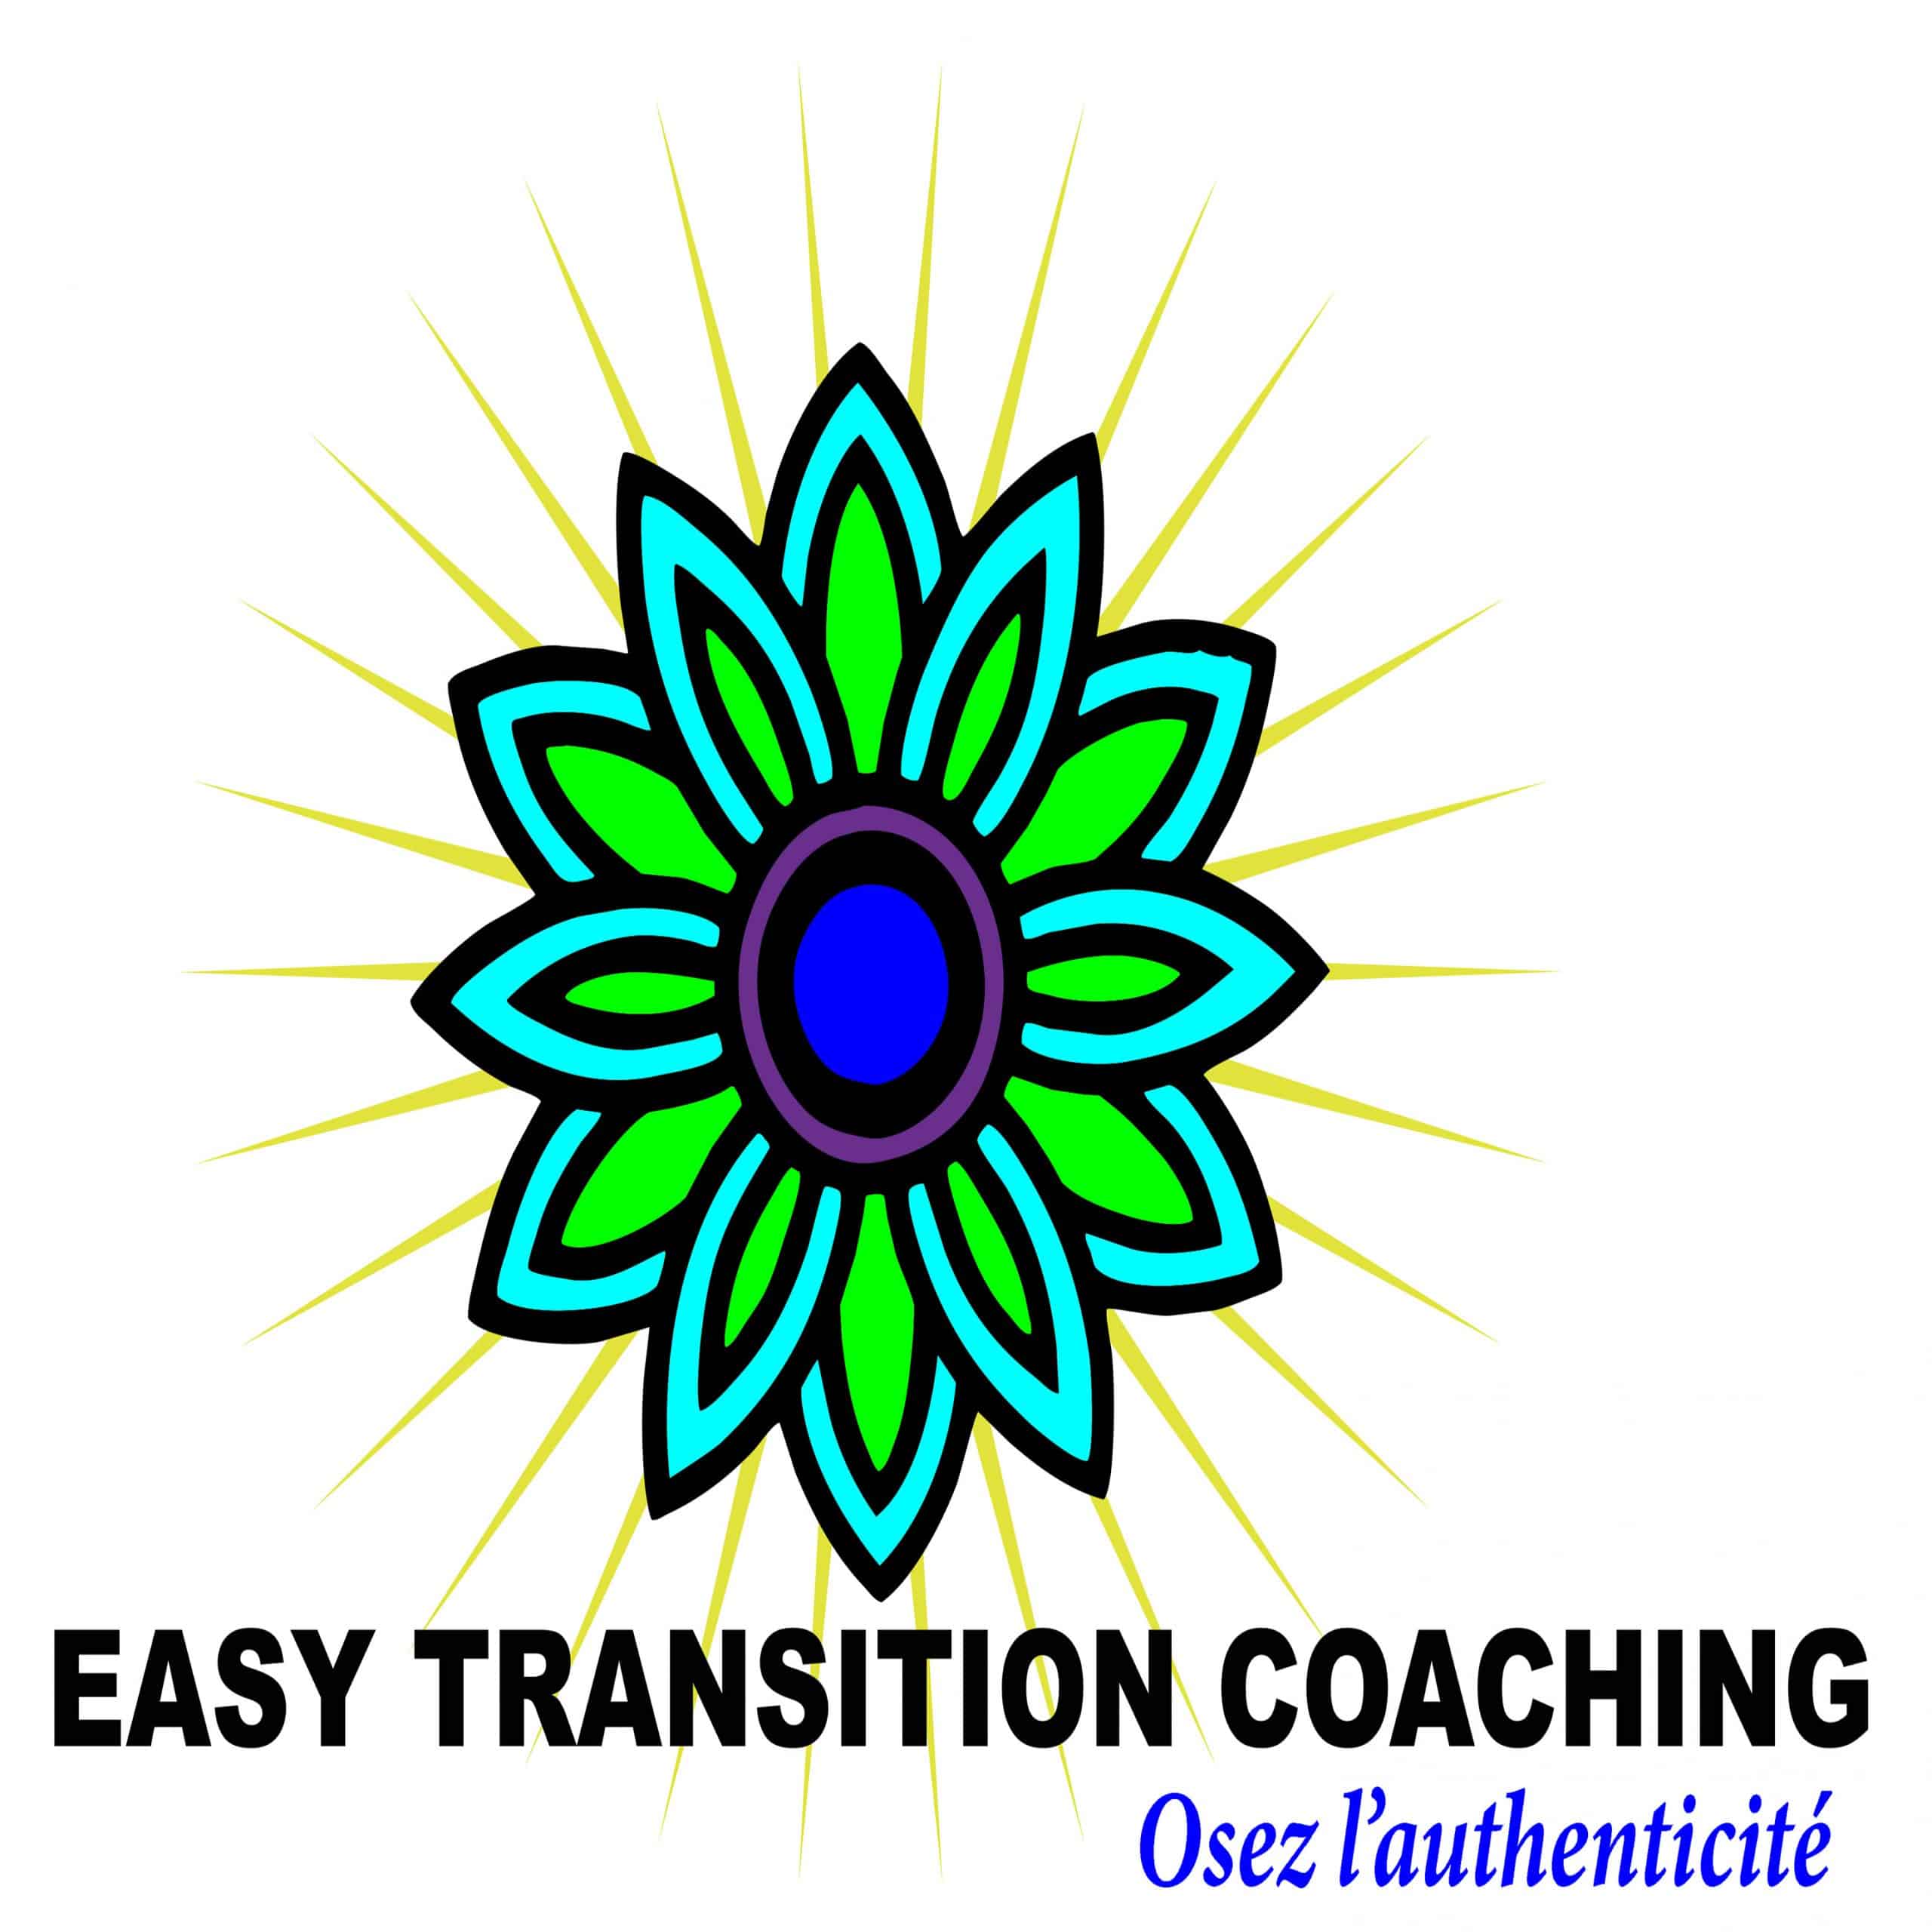 Easy transition coaching